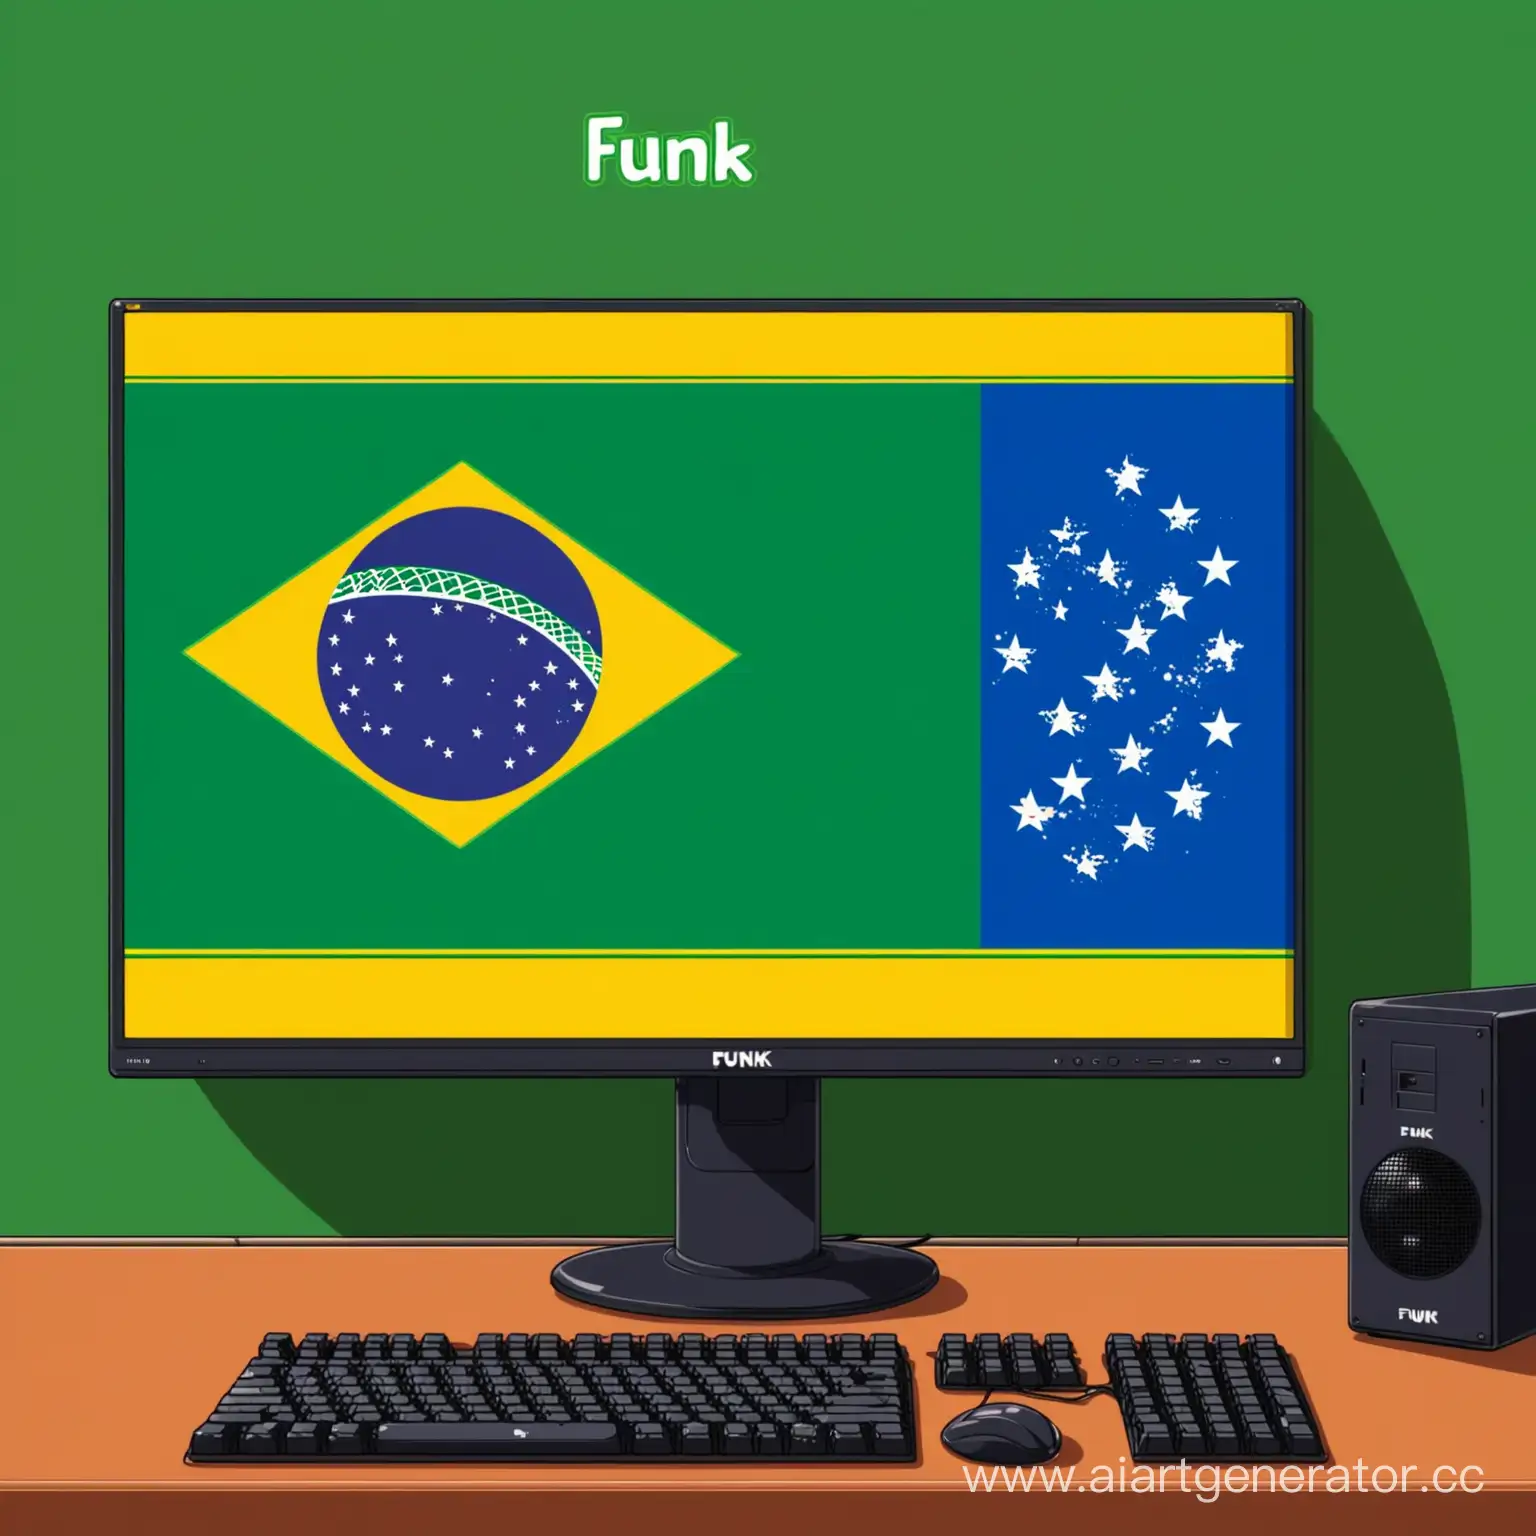 Anime-PC-with-Brazilian-Flag-Screen-and-FUNK-Caption